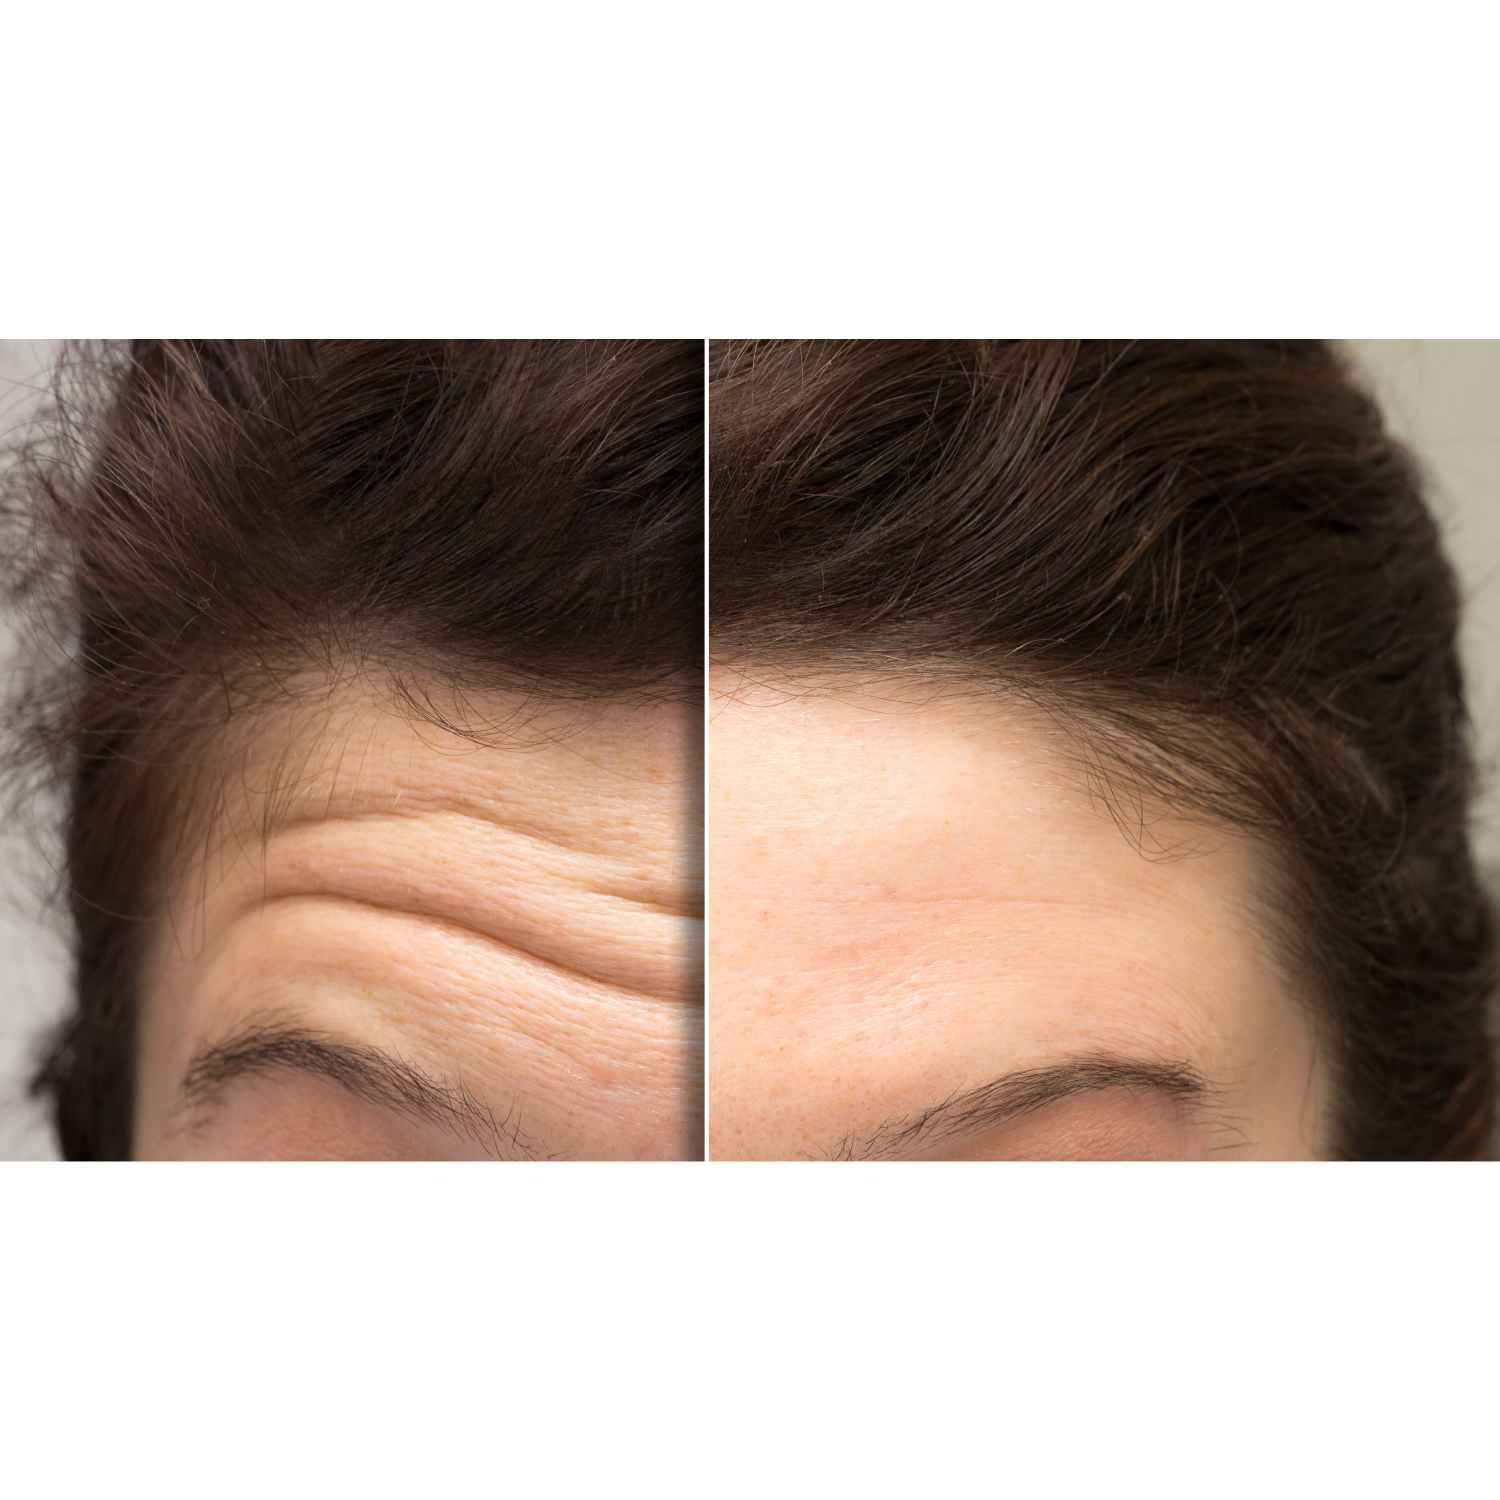 Wrinkle Relaxer Services Before and After Flawless Skin MedSpa Newyork